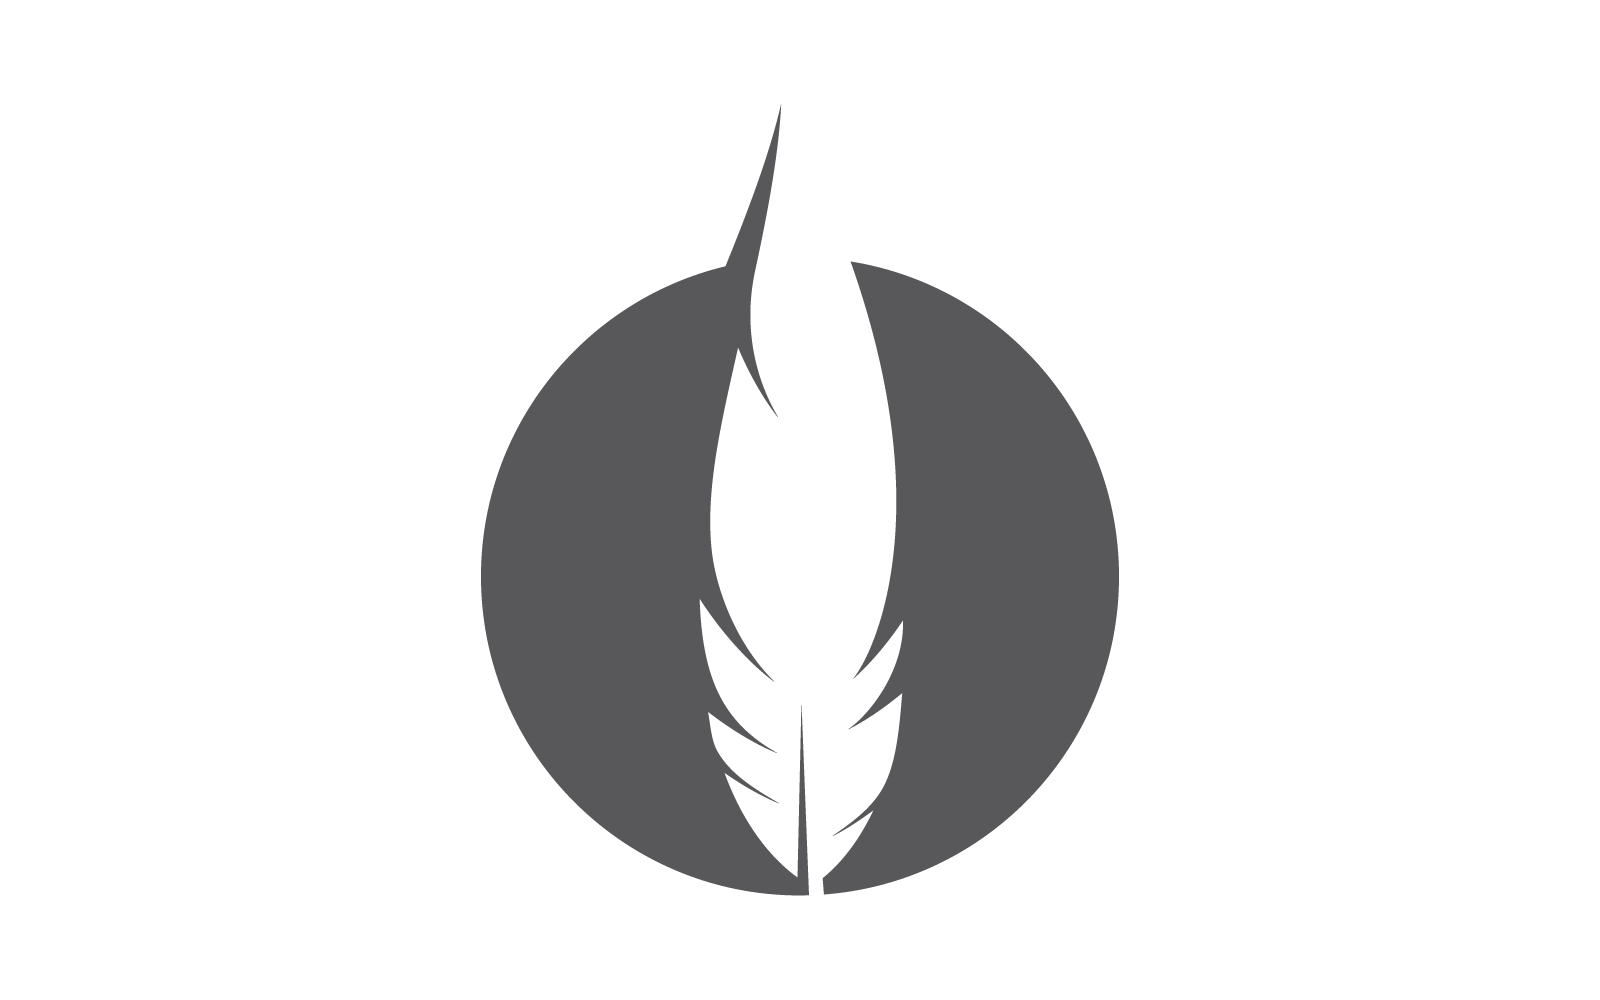 Feather illustration logo icon vector flat design template eps 10